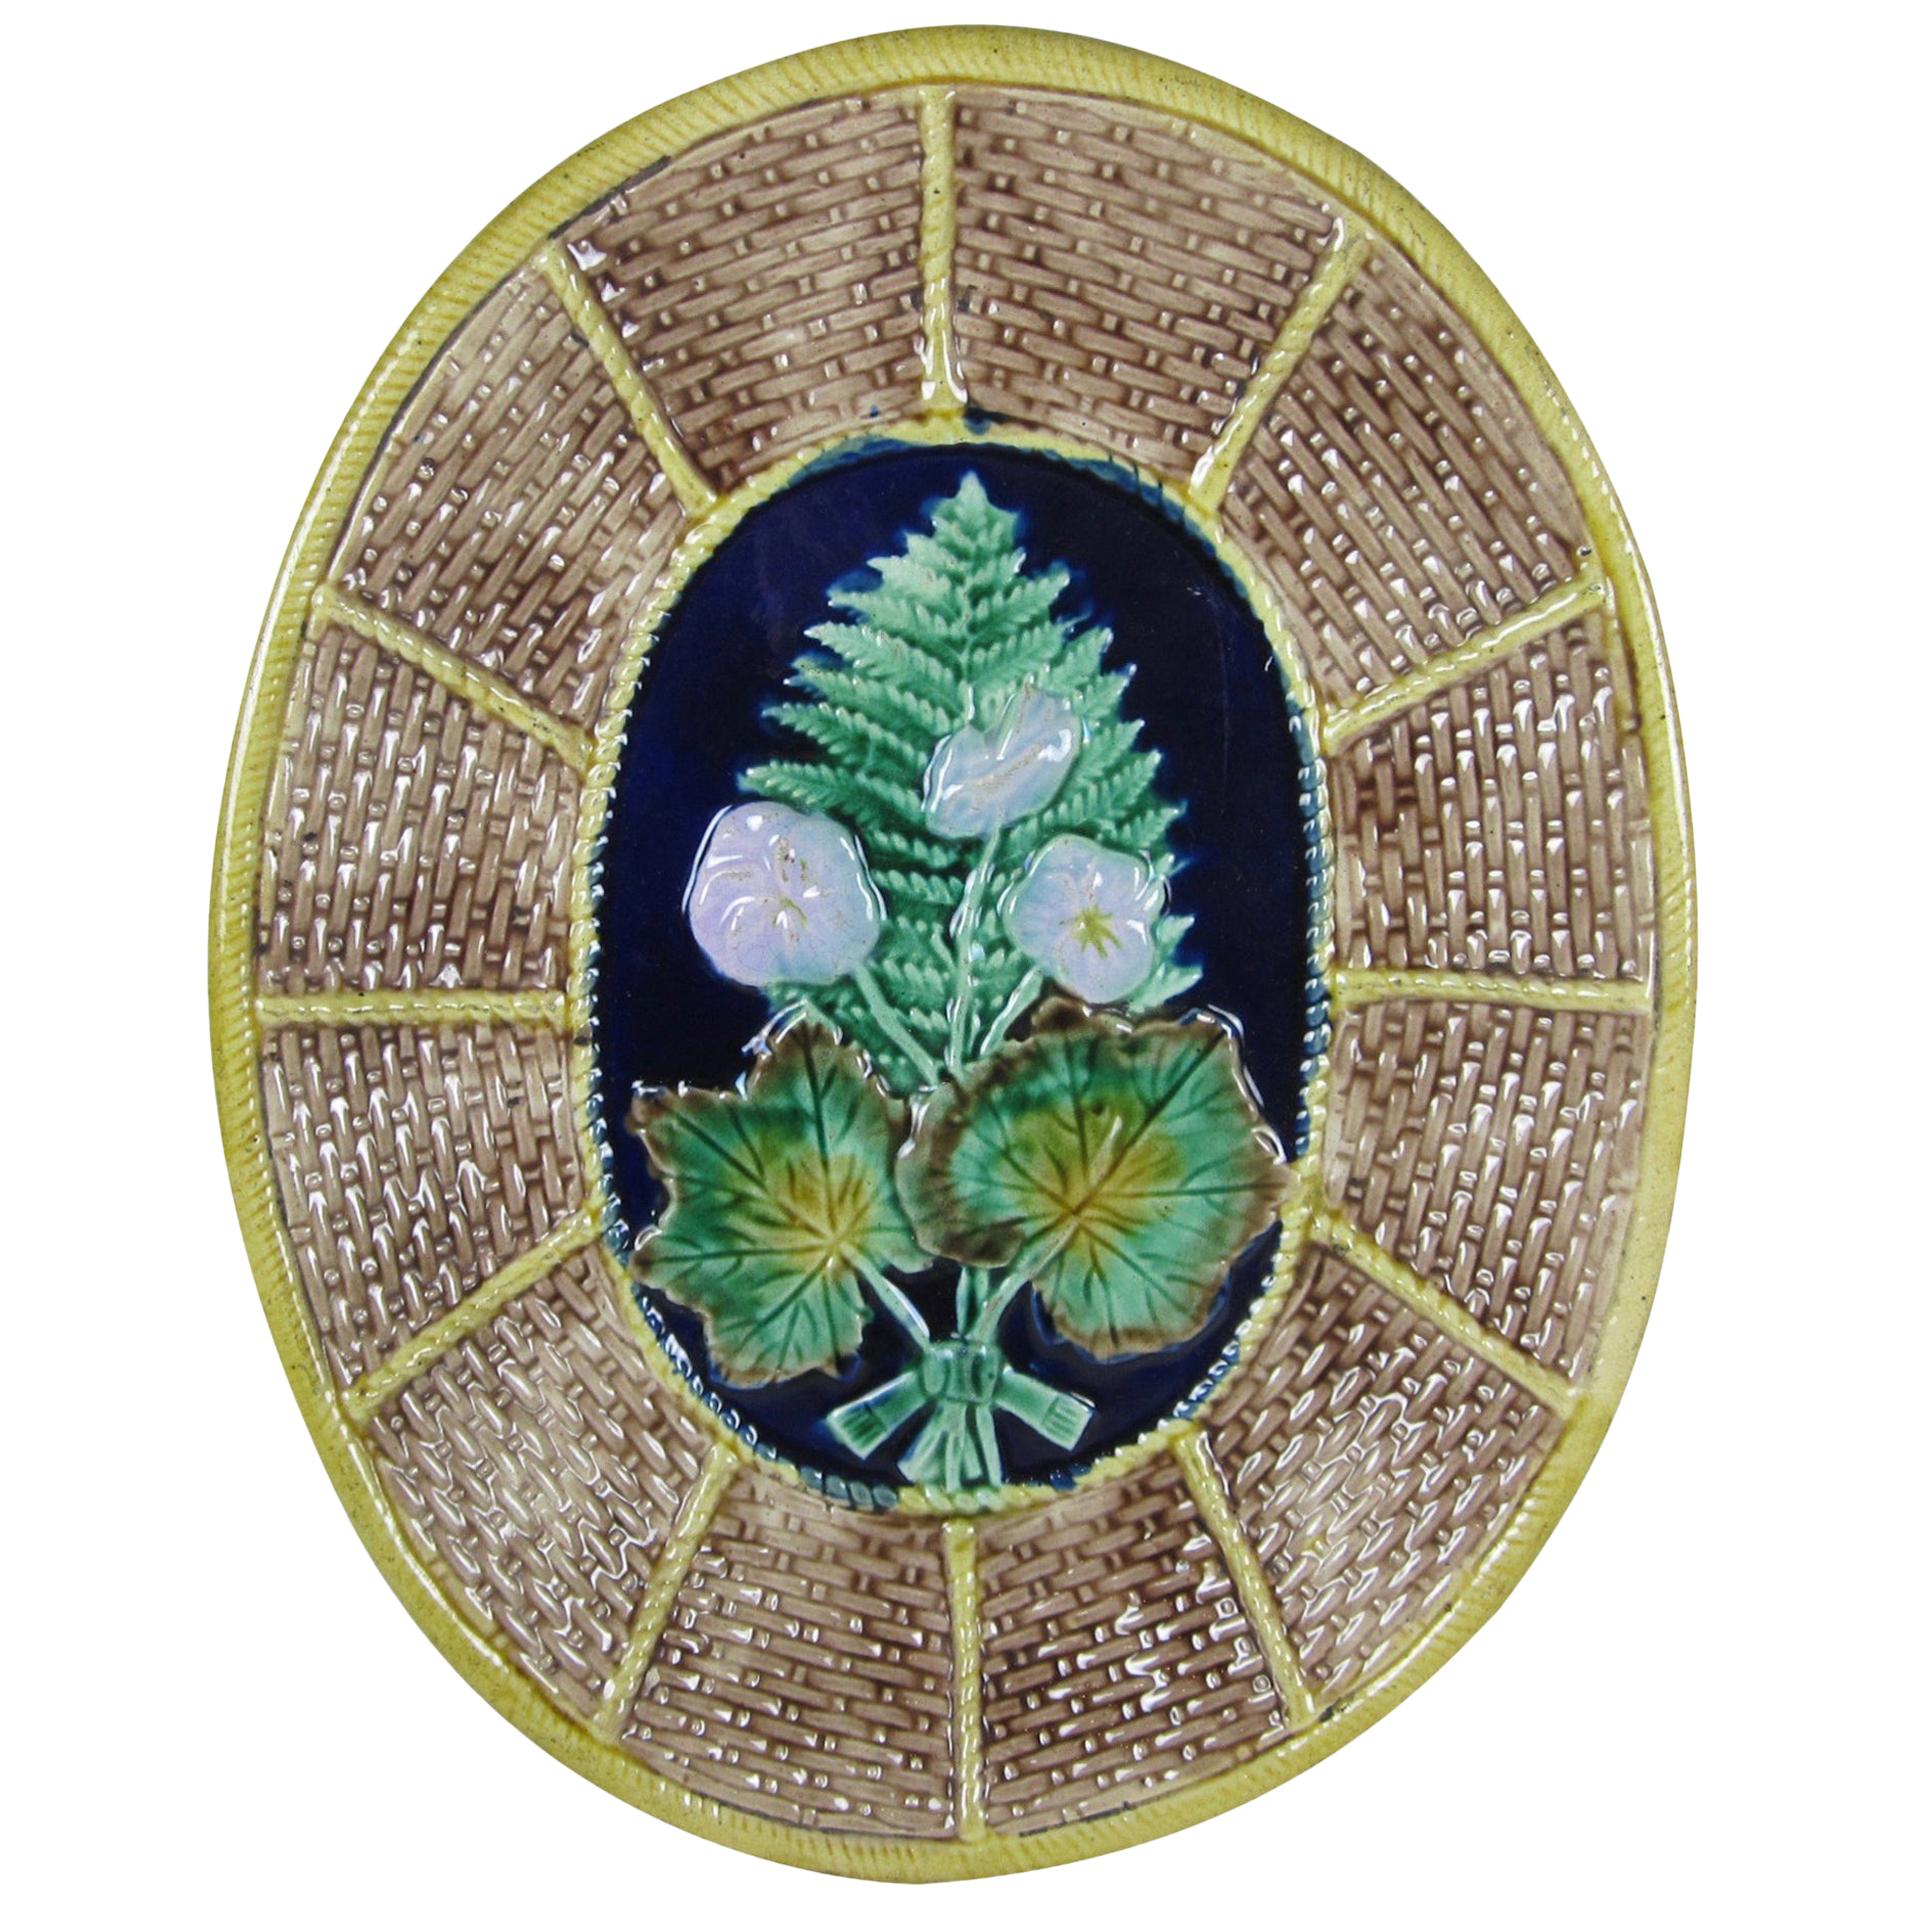 English Majolica Fern and Floral on Wicker Basket Form Oval Cheese Board Platter